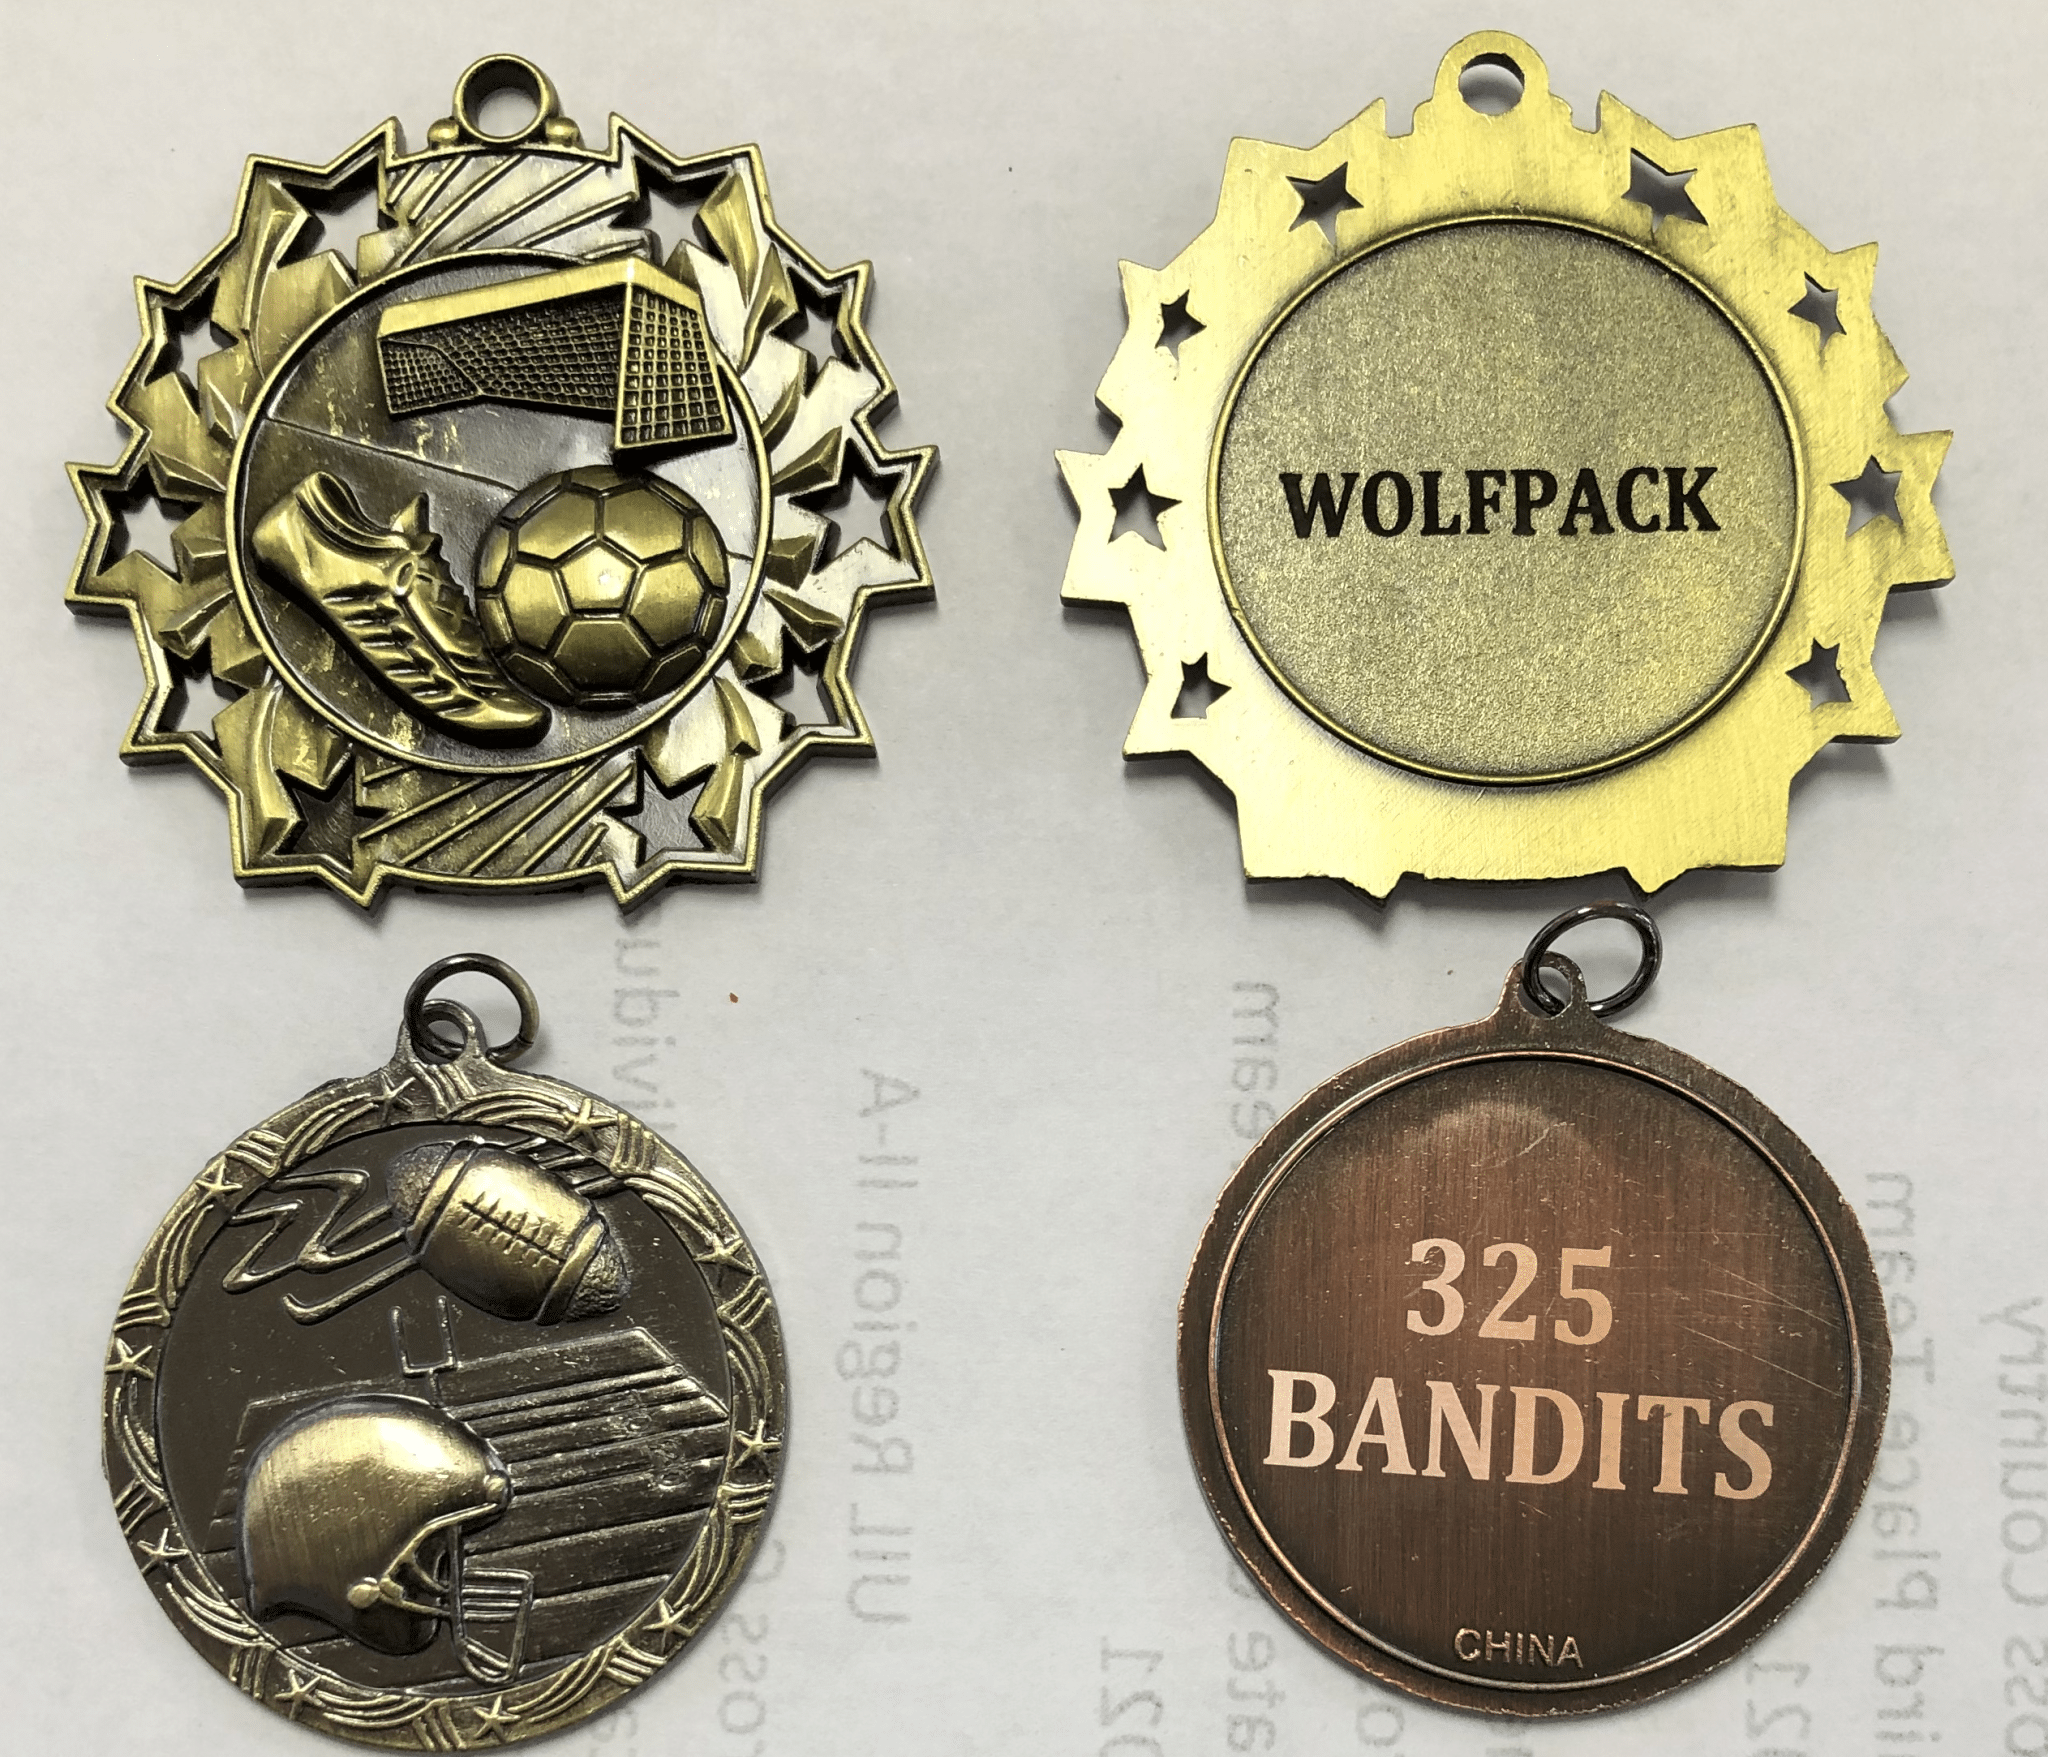 ENGRAVED STOCK MEDALS